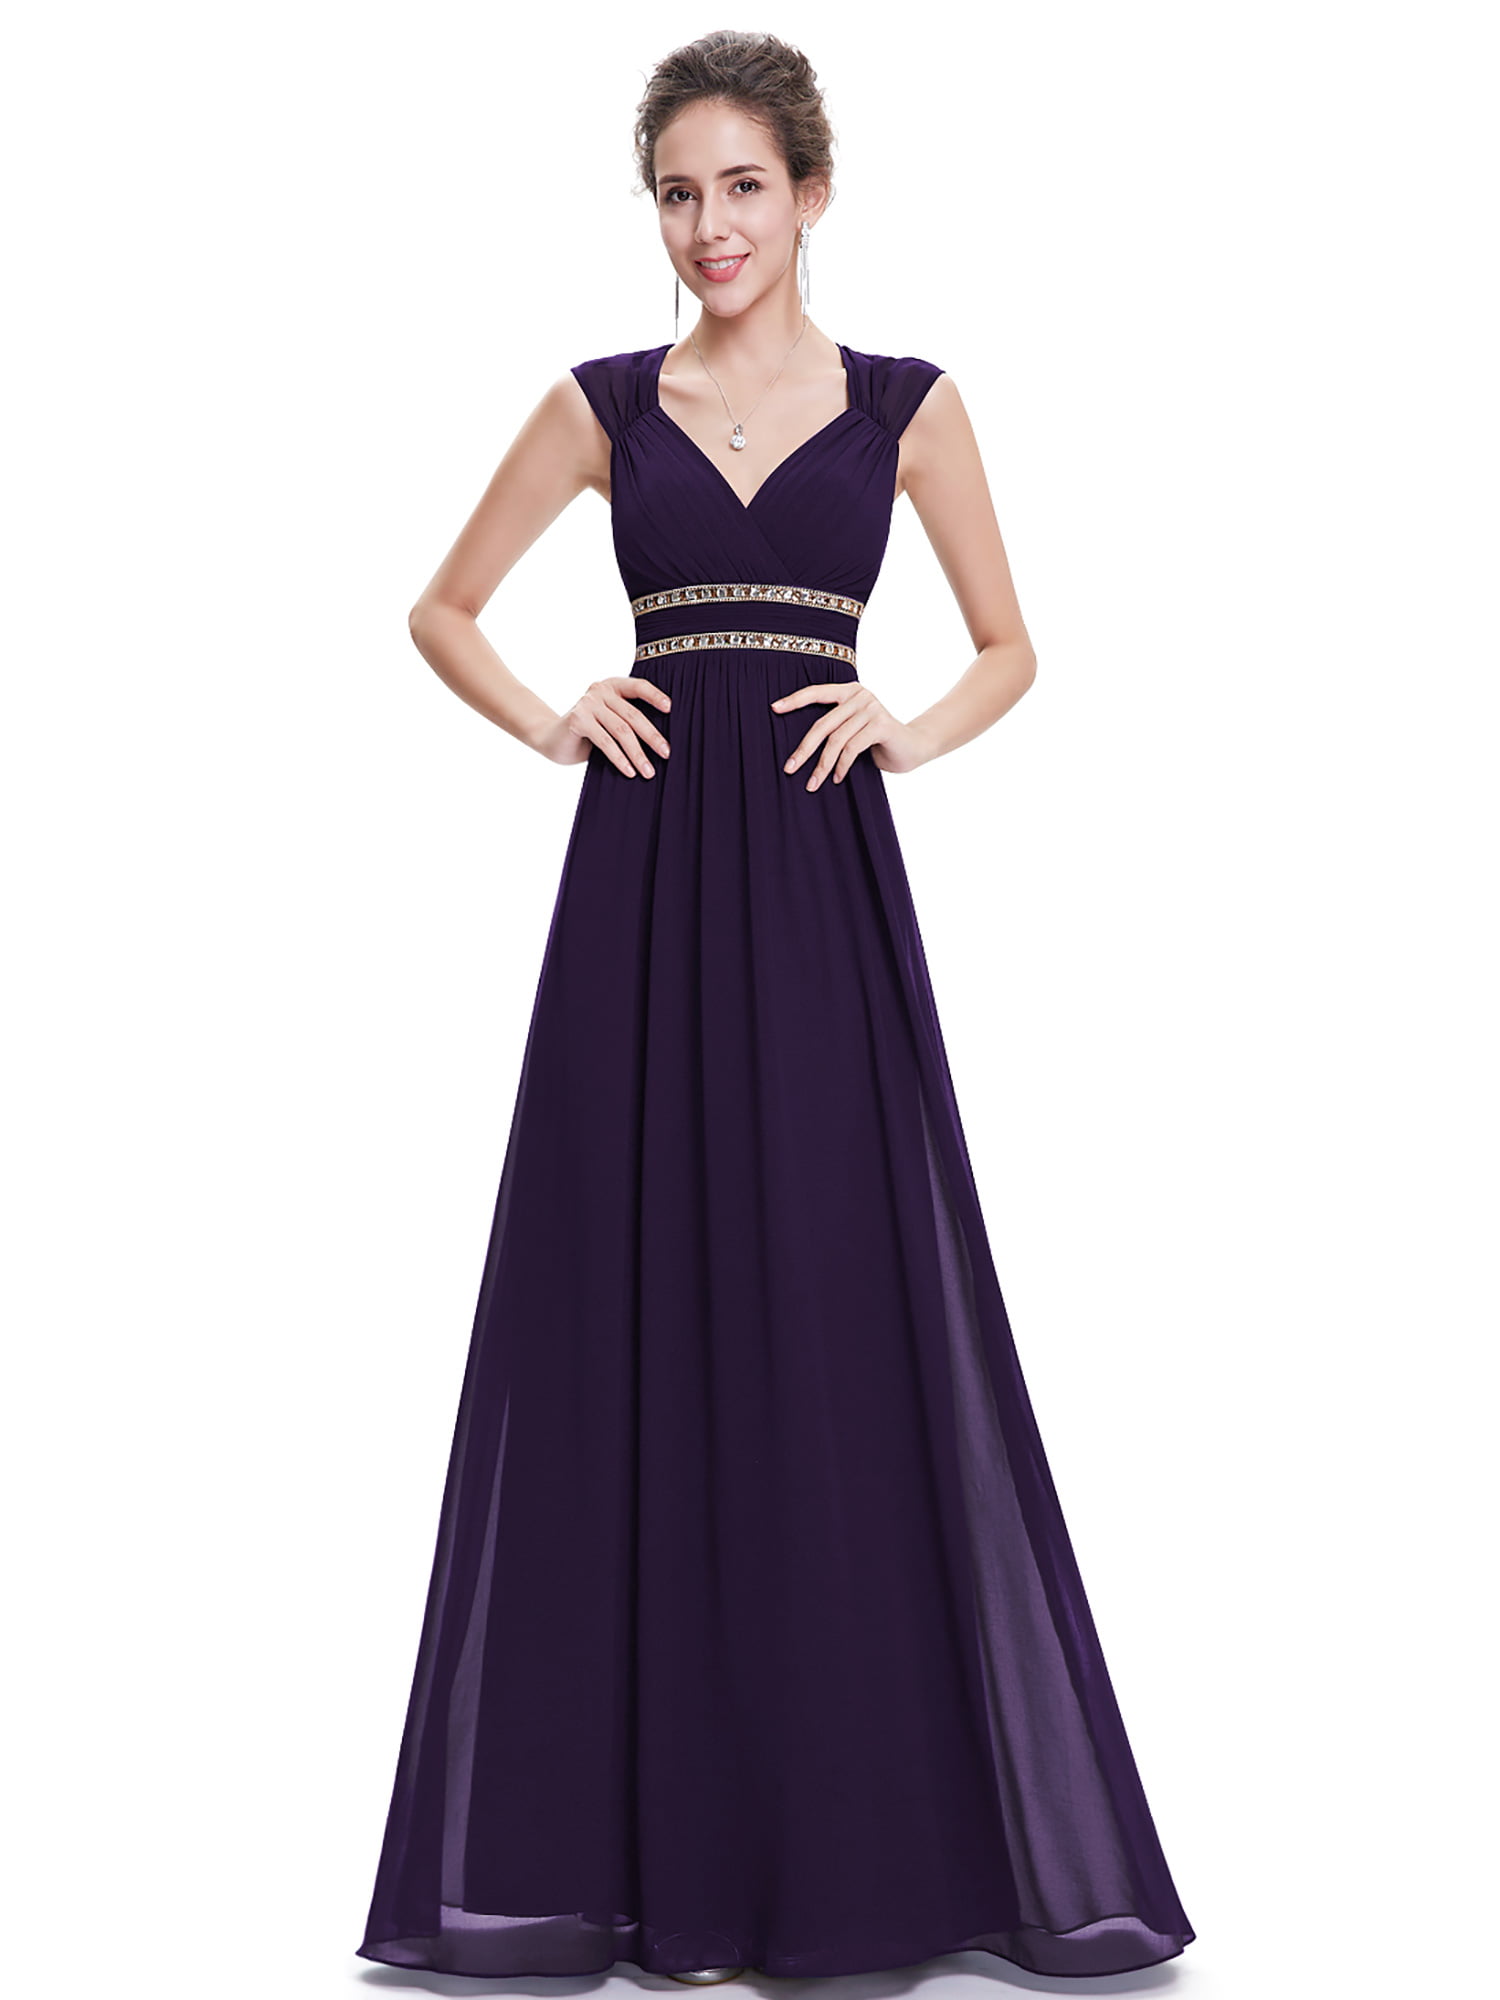 Ever-Pretty US Women's A-Line Cap Sleeve Long Evening Party Prom Dresses Gowns